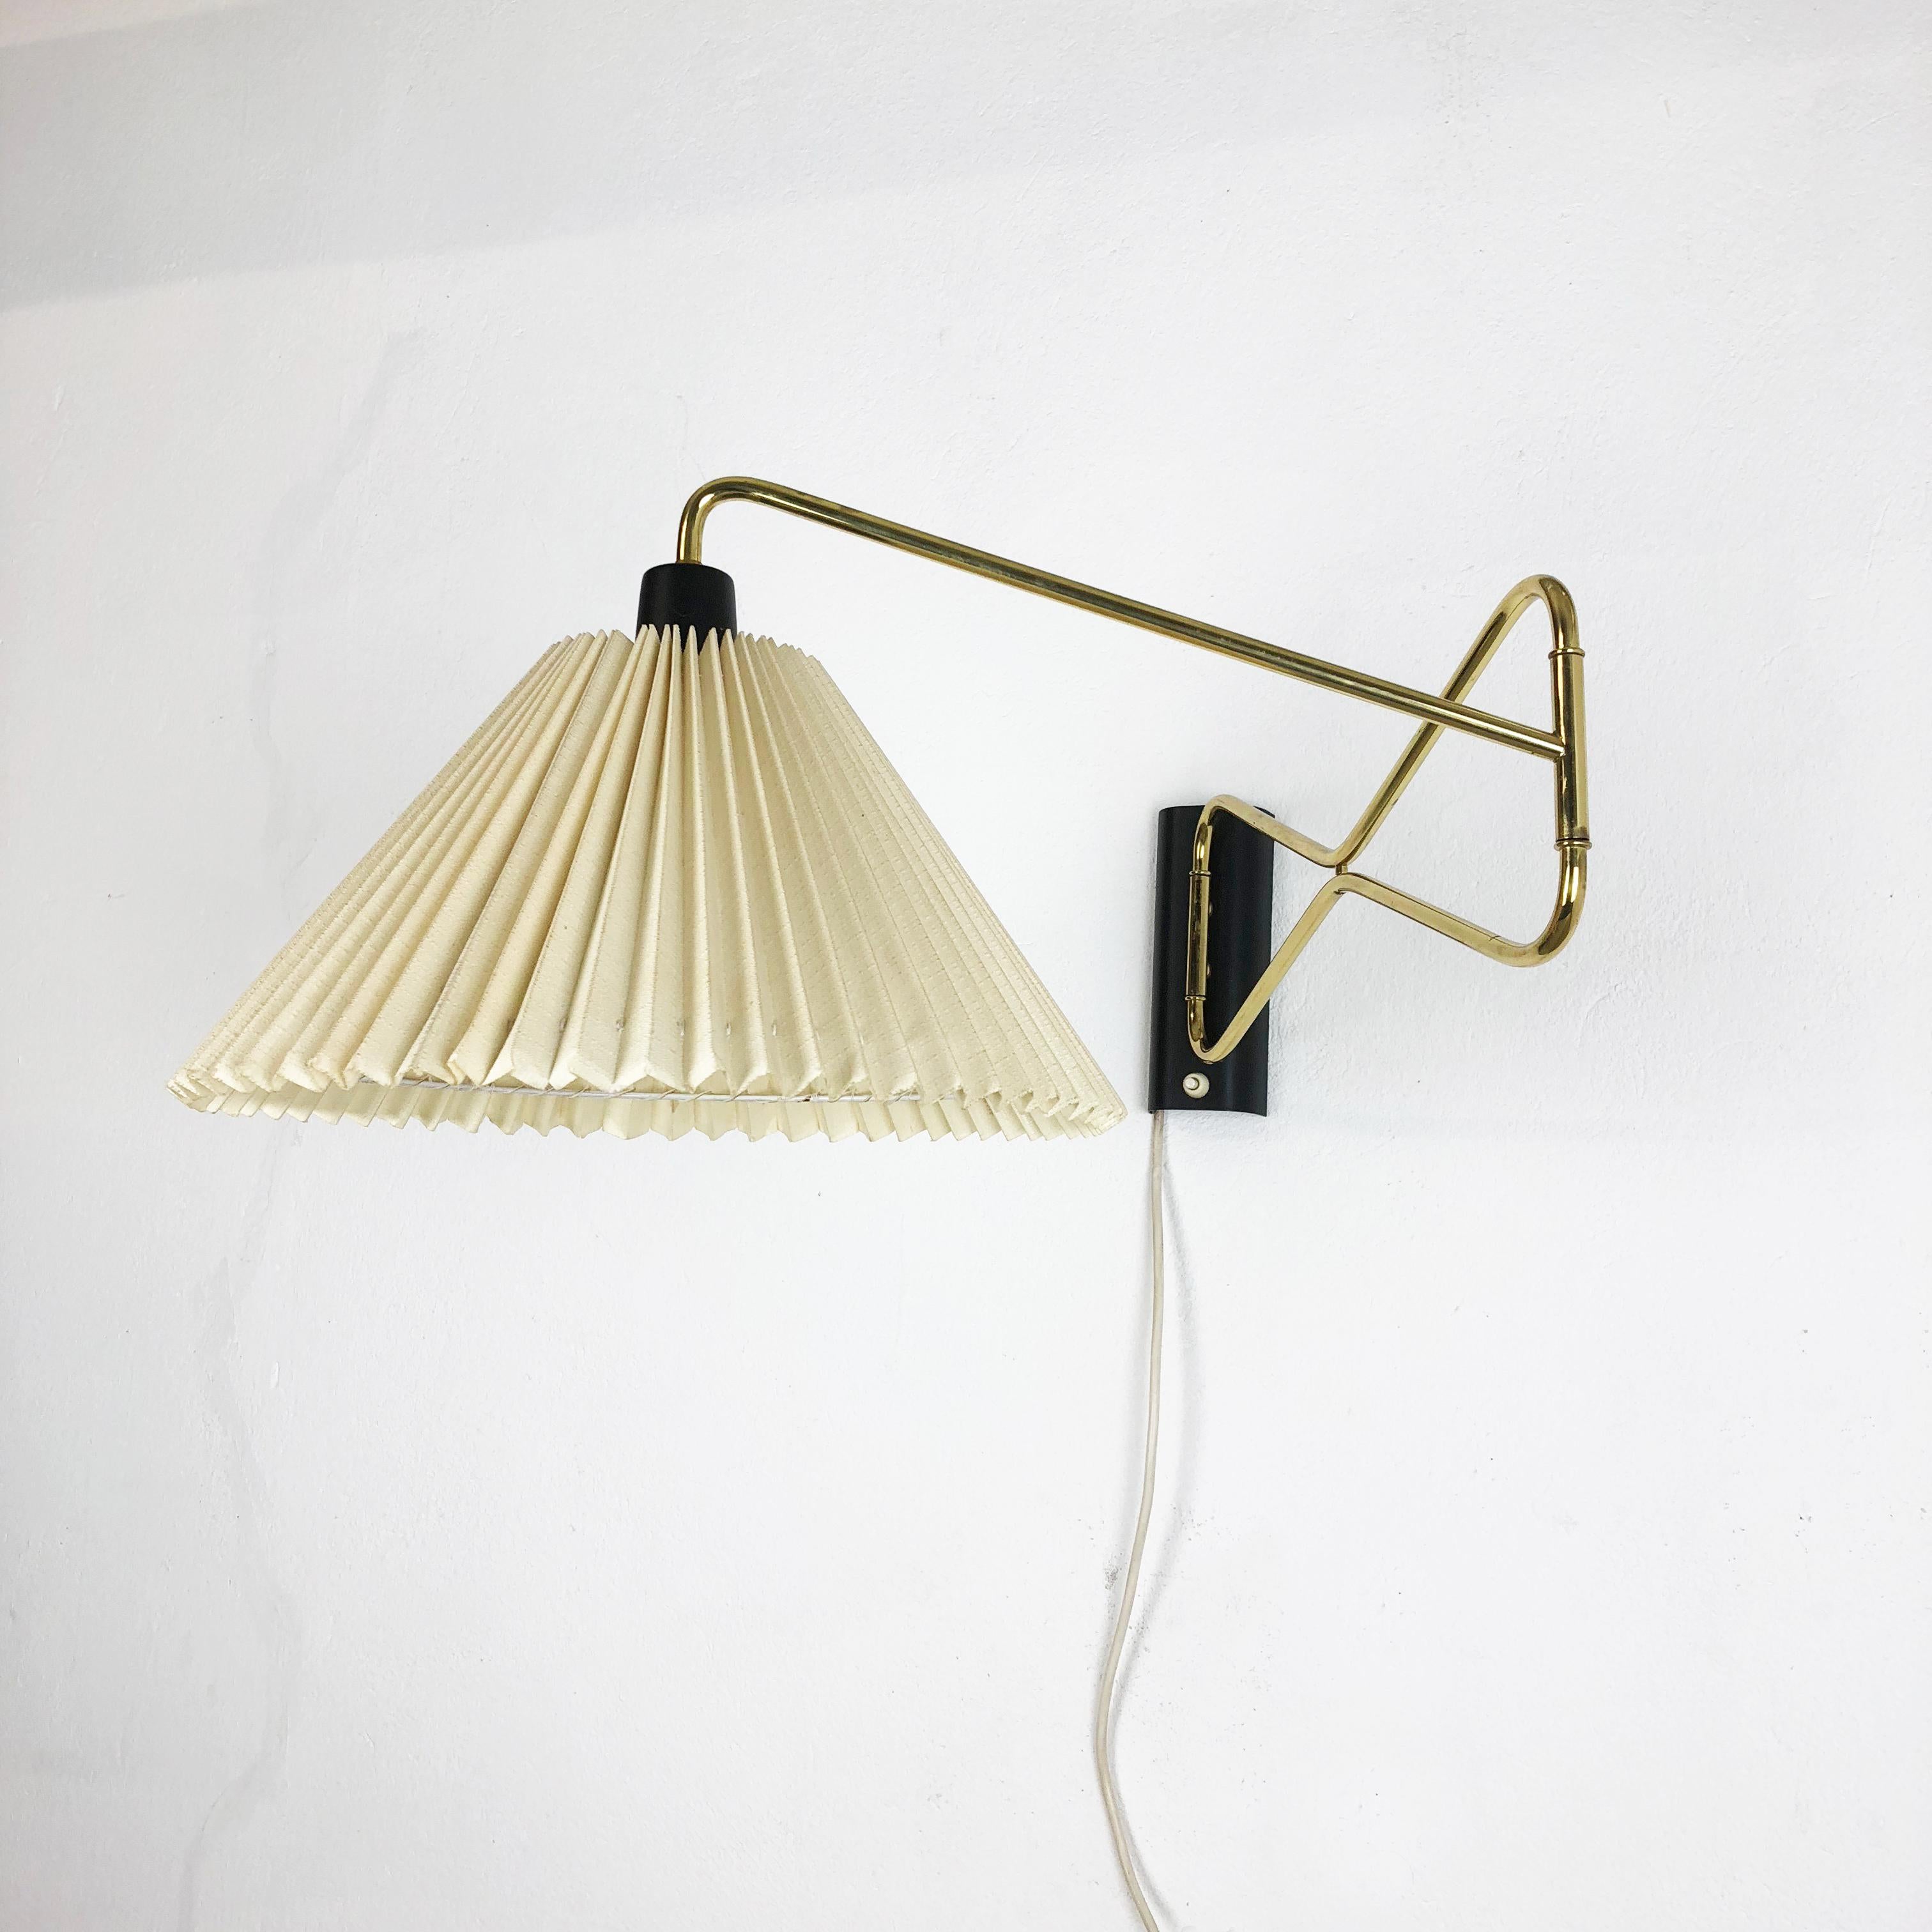 Original Modernist 1950s Brass Metal Swing Wall Light Made by Cosack, Germany 14